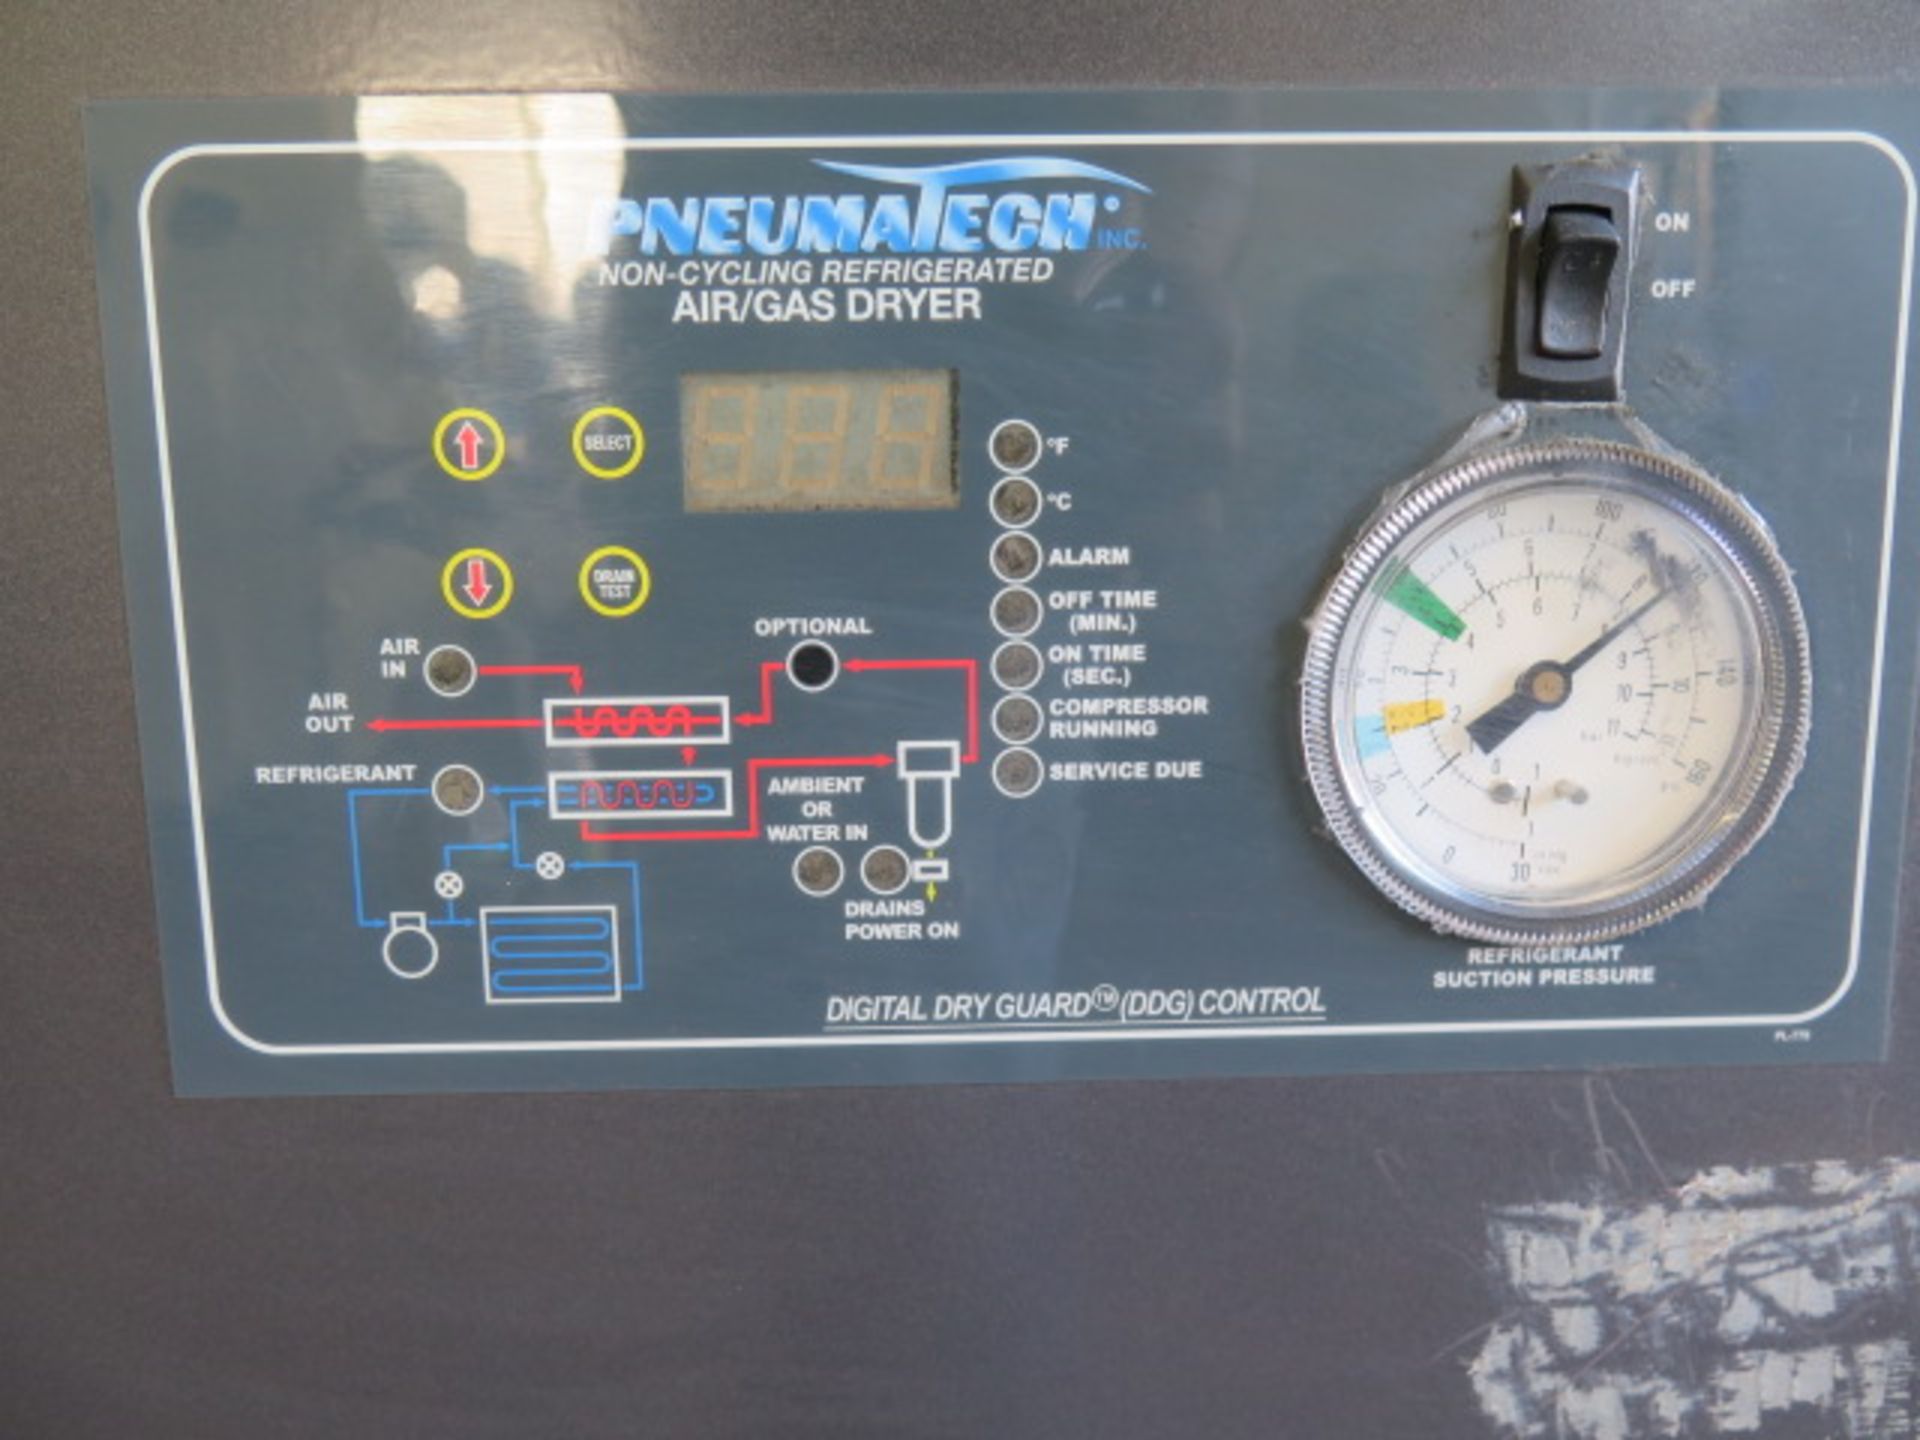 Pneumatech AD-500 Refrigerated Air Dryer s/n 986554 - Image 3 of 5